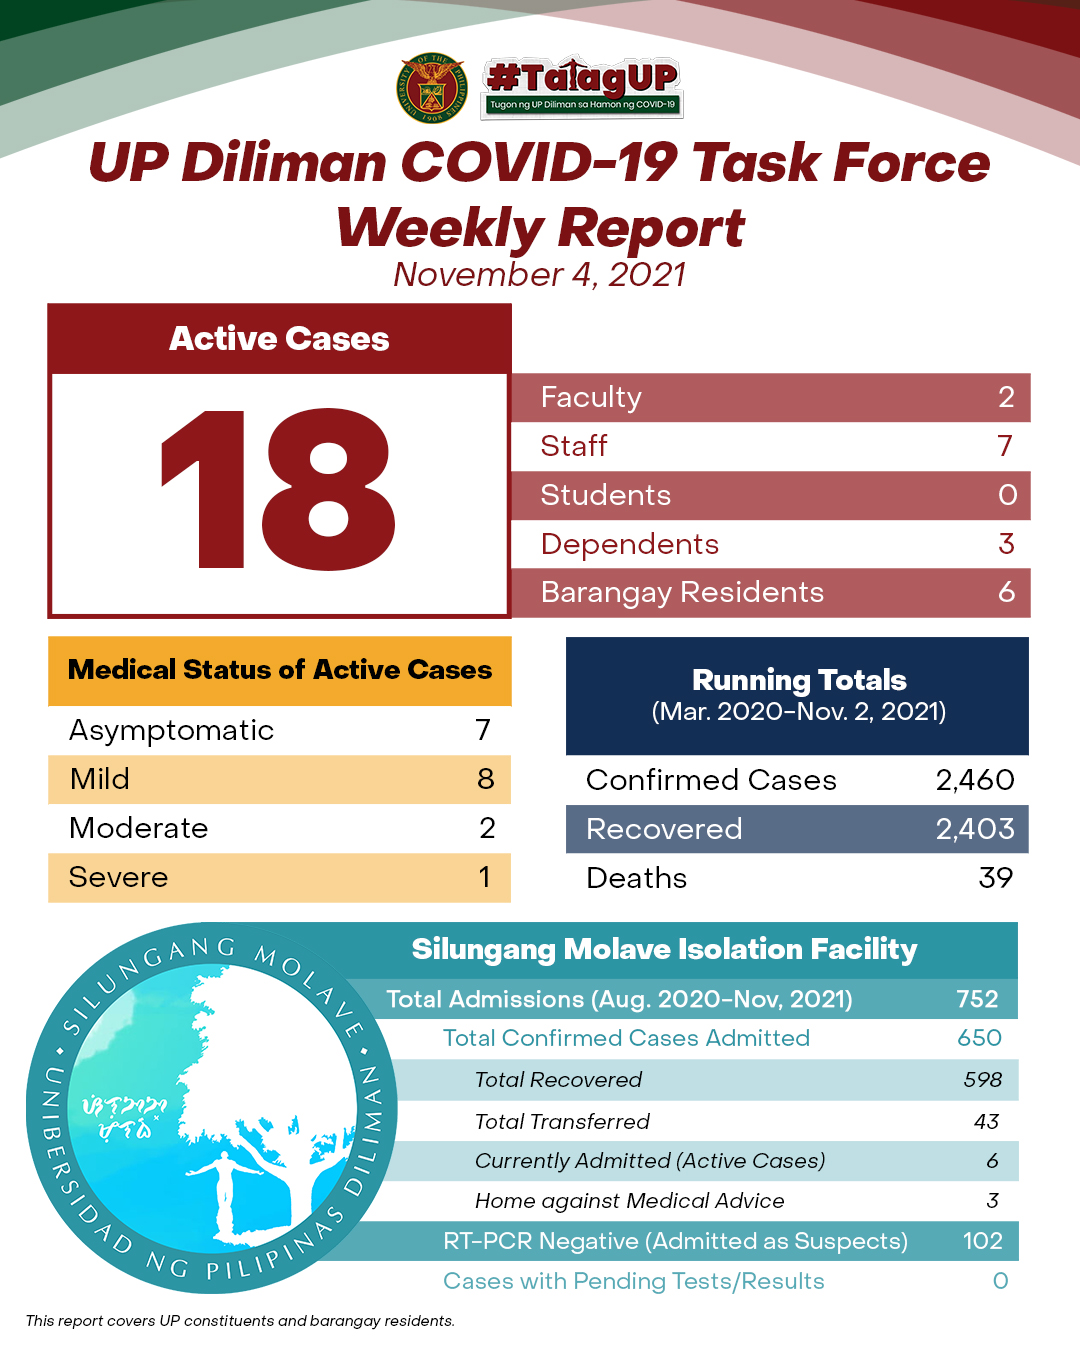 UP Diliman COVID-19 Task Force Weekly Report (November 4, 2021)